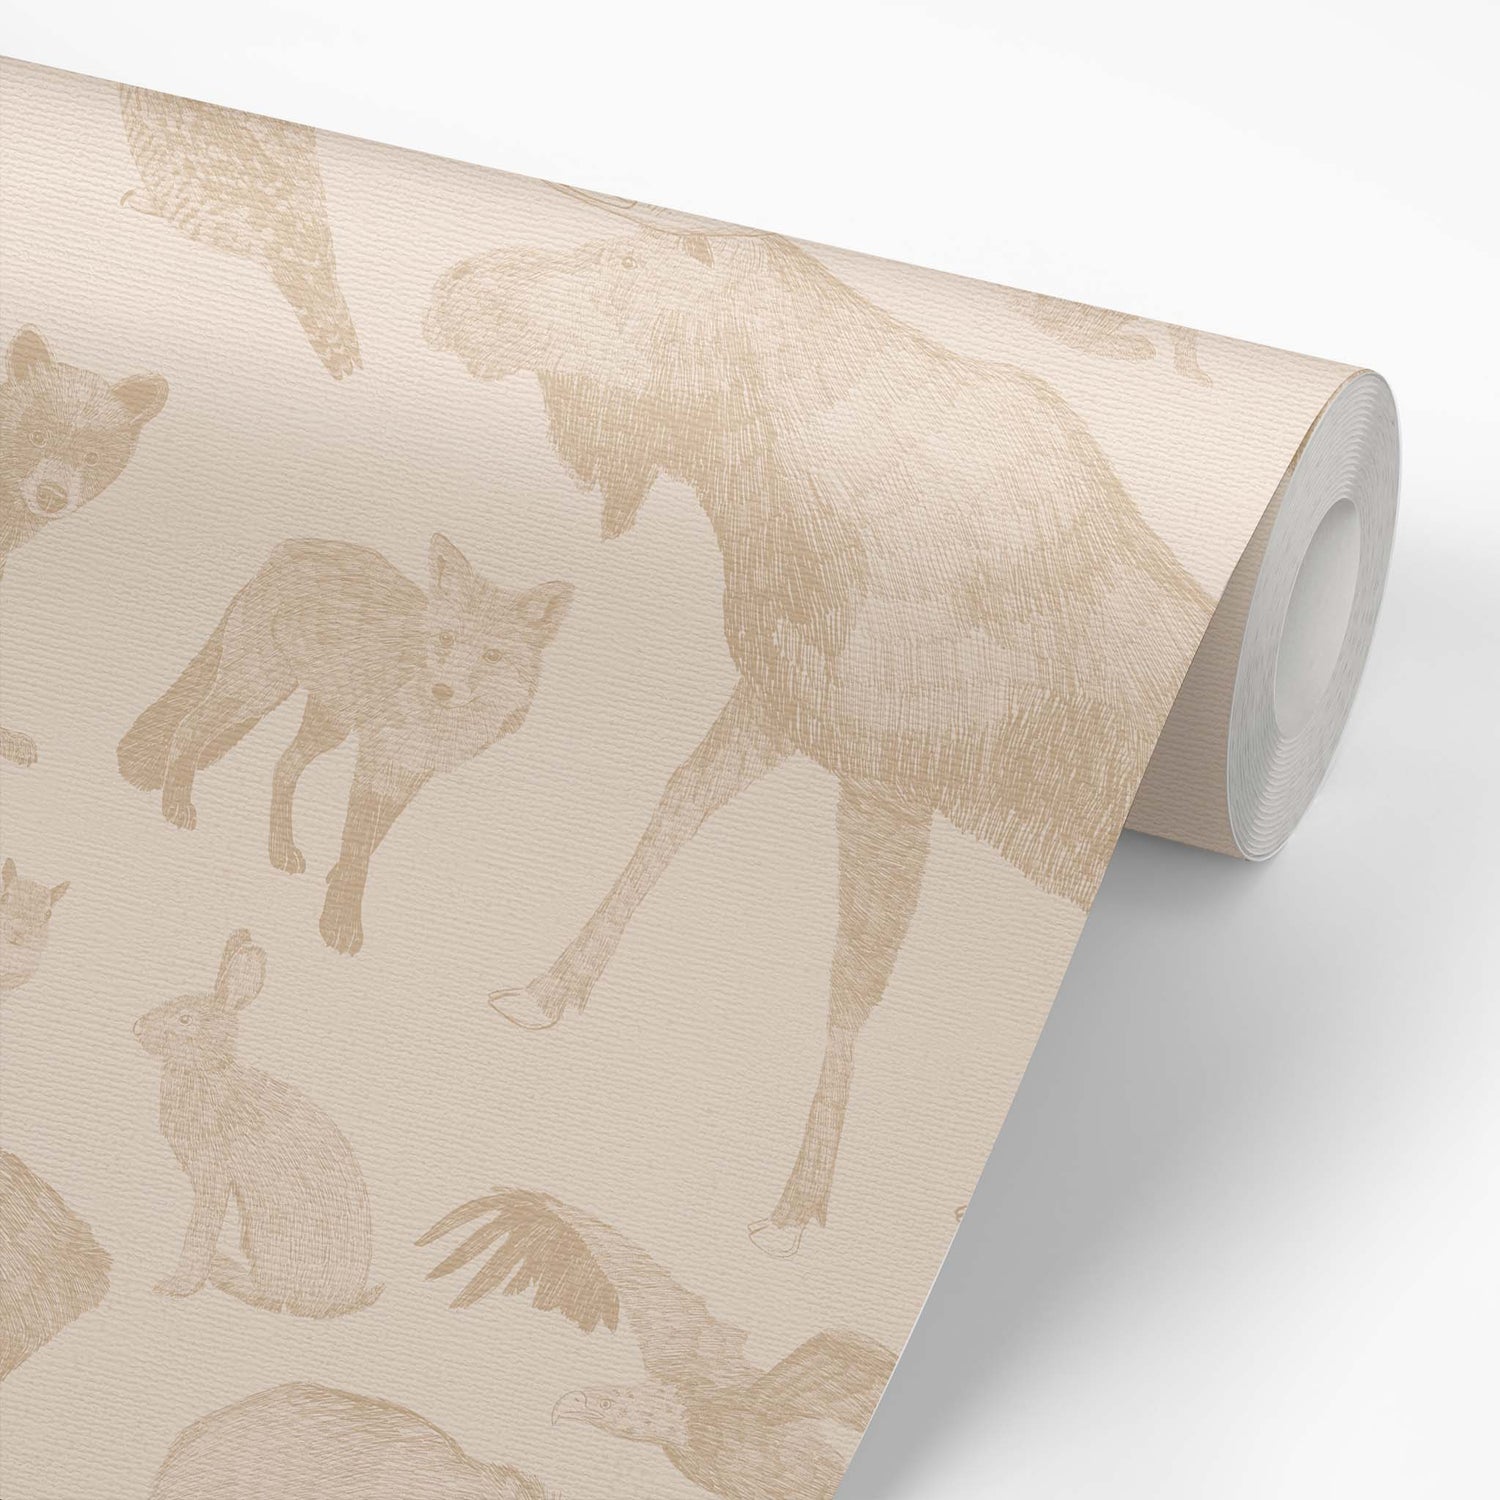 Wallpaper panel featuring Cayla Naylor Kenai- Dogwood Peel and Stick Wallpaper - a nature inspired pattern